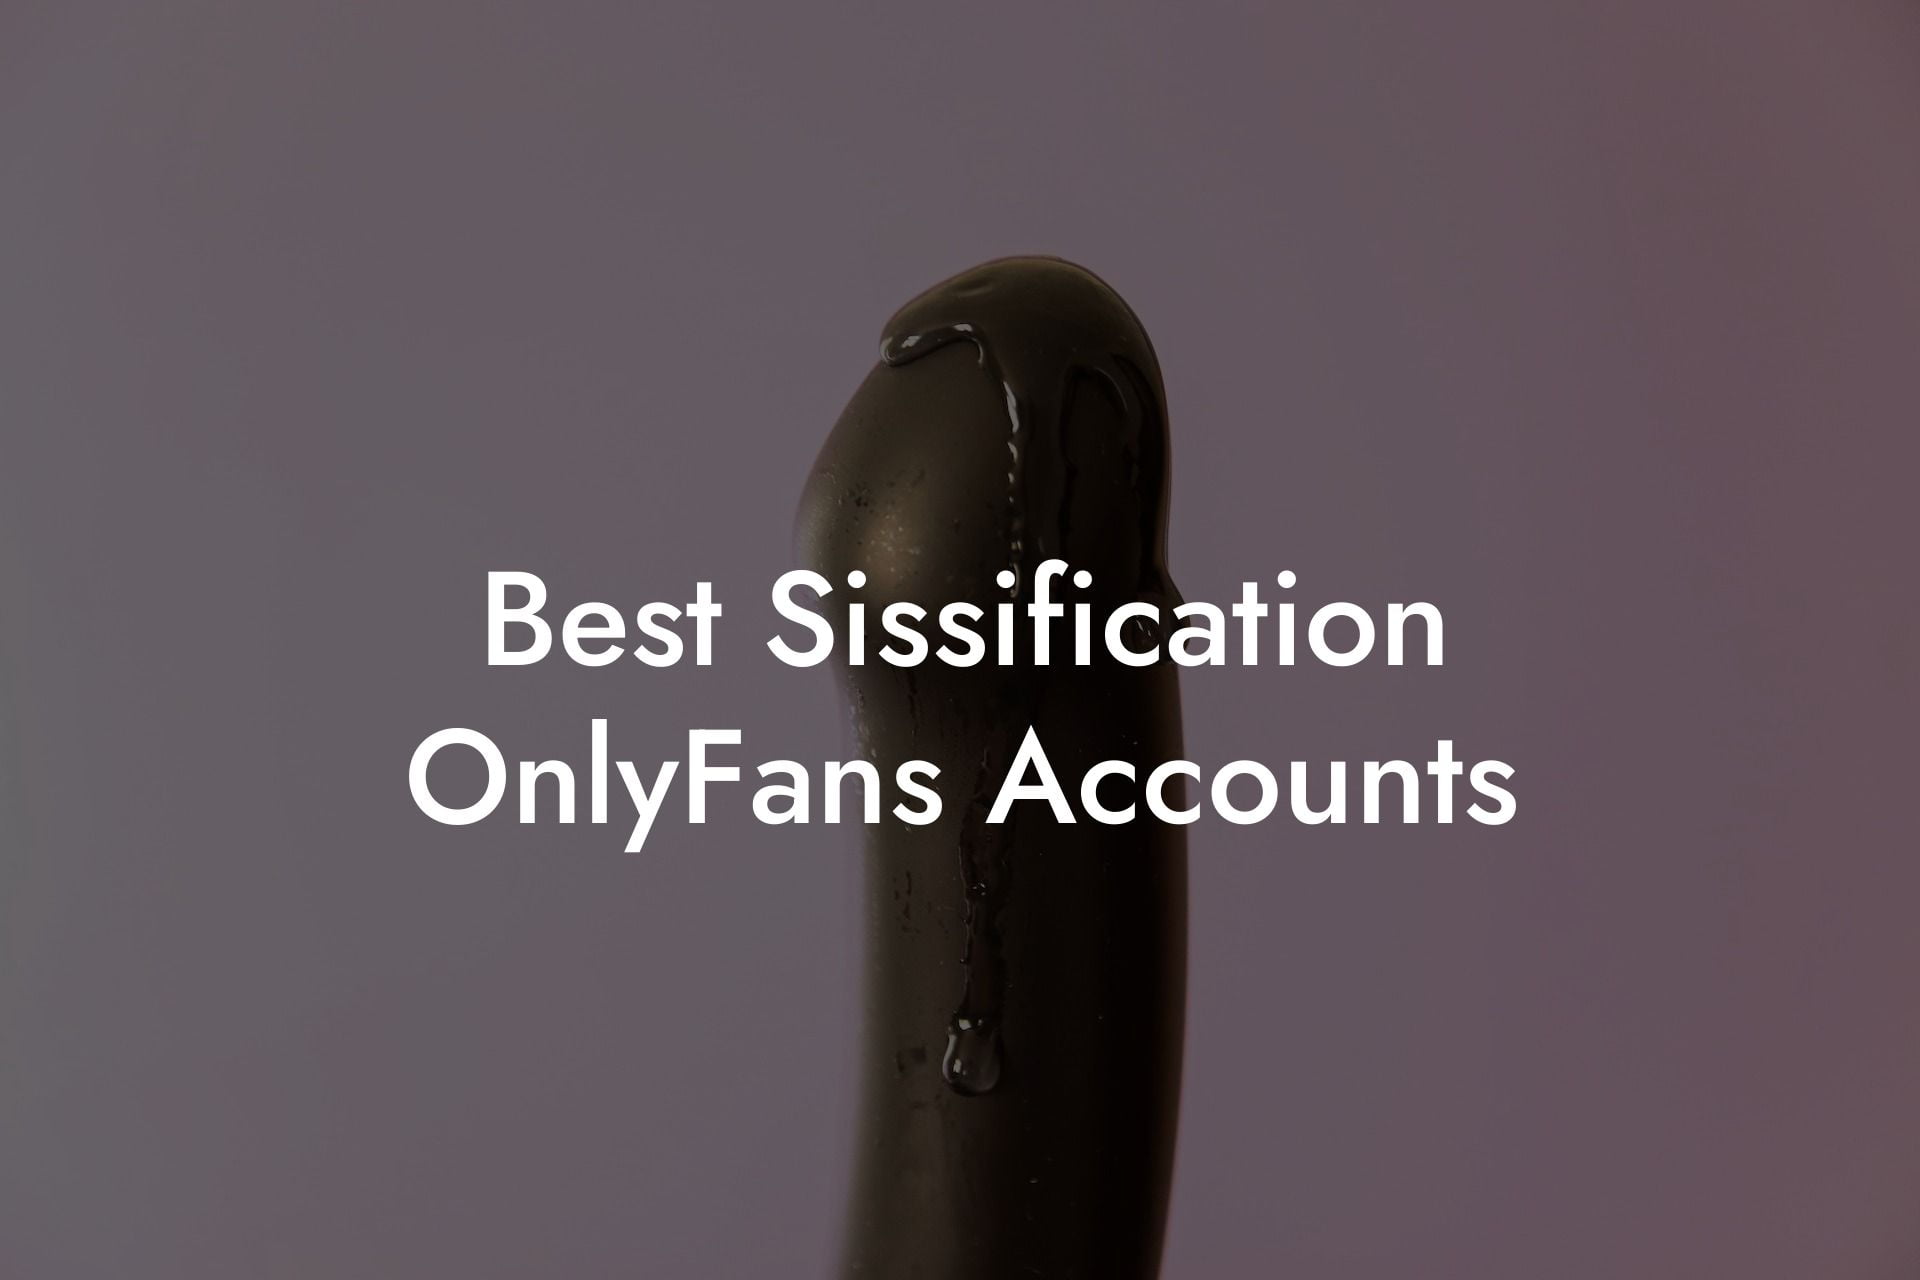 Best Sissification OnlyFans Accounts